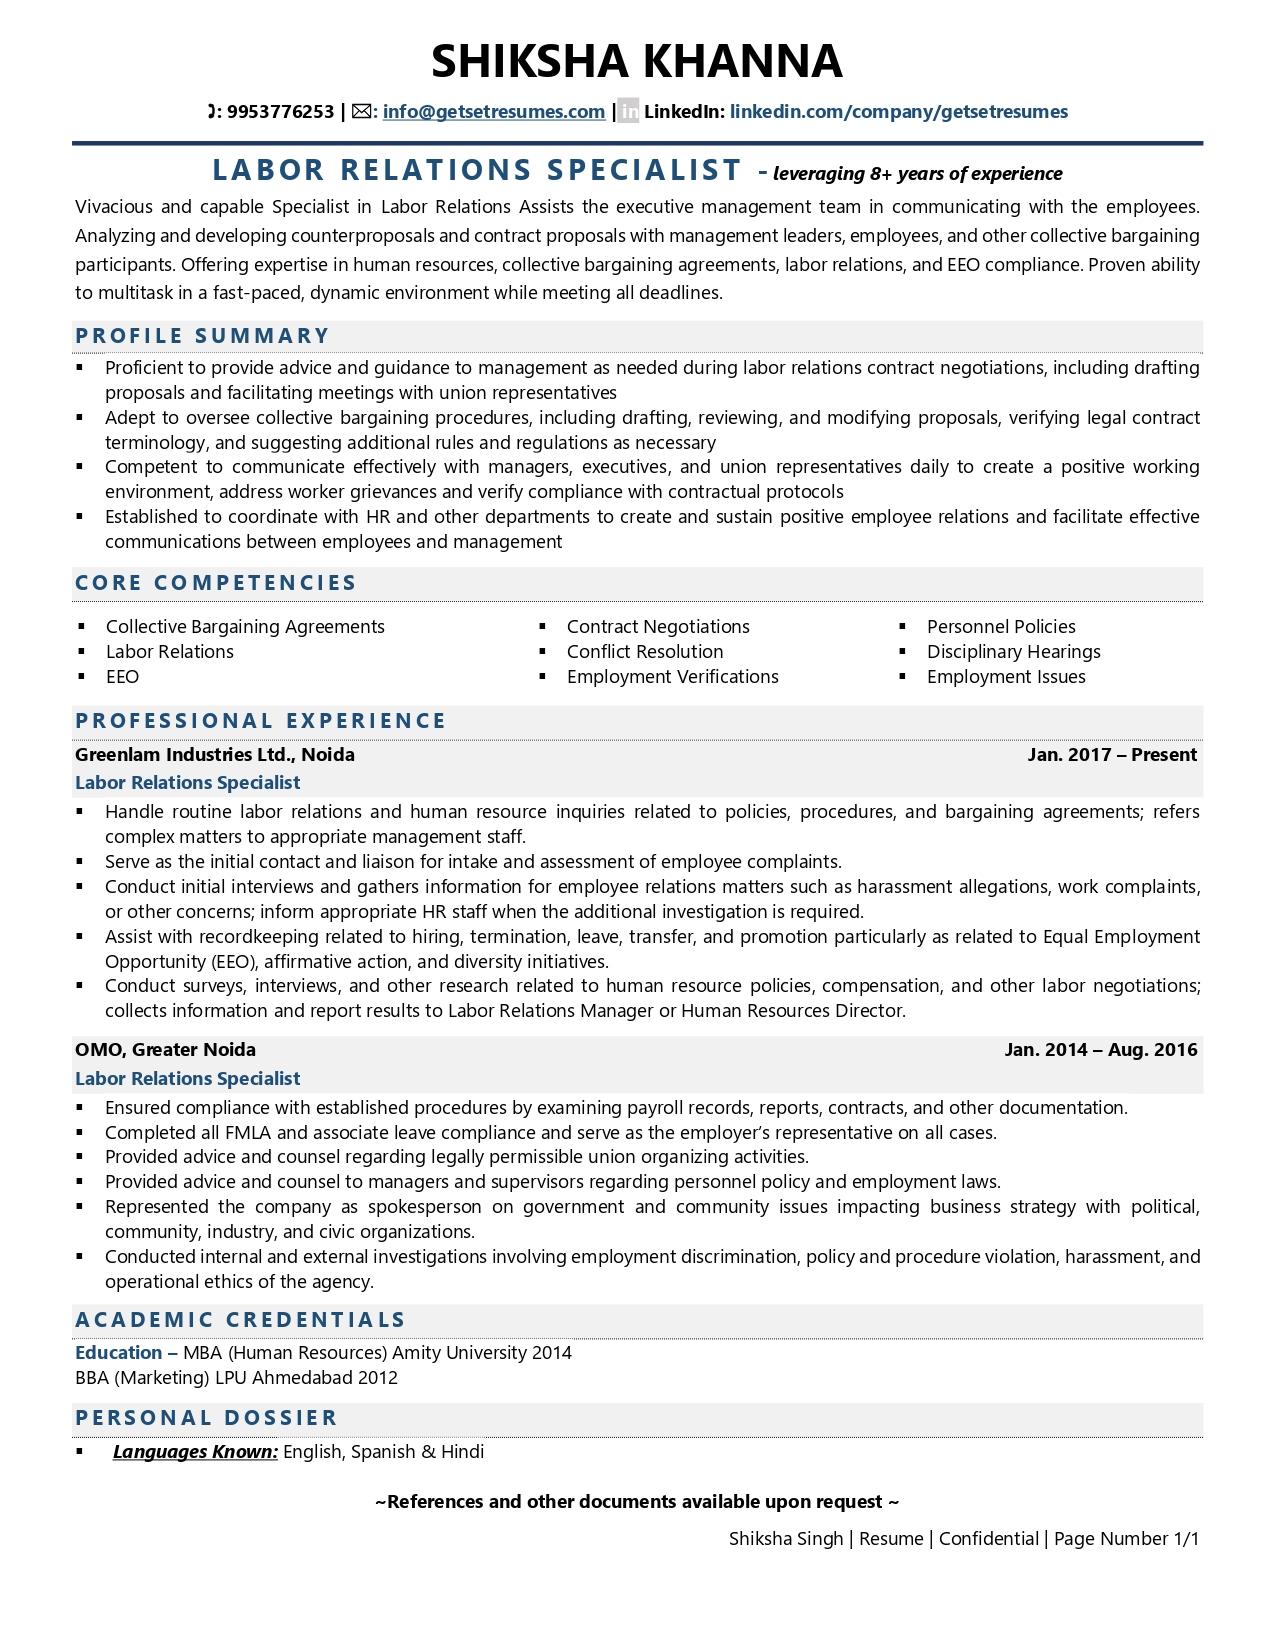 Labor Relations Specialist - Resume Example & Template